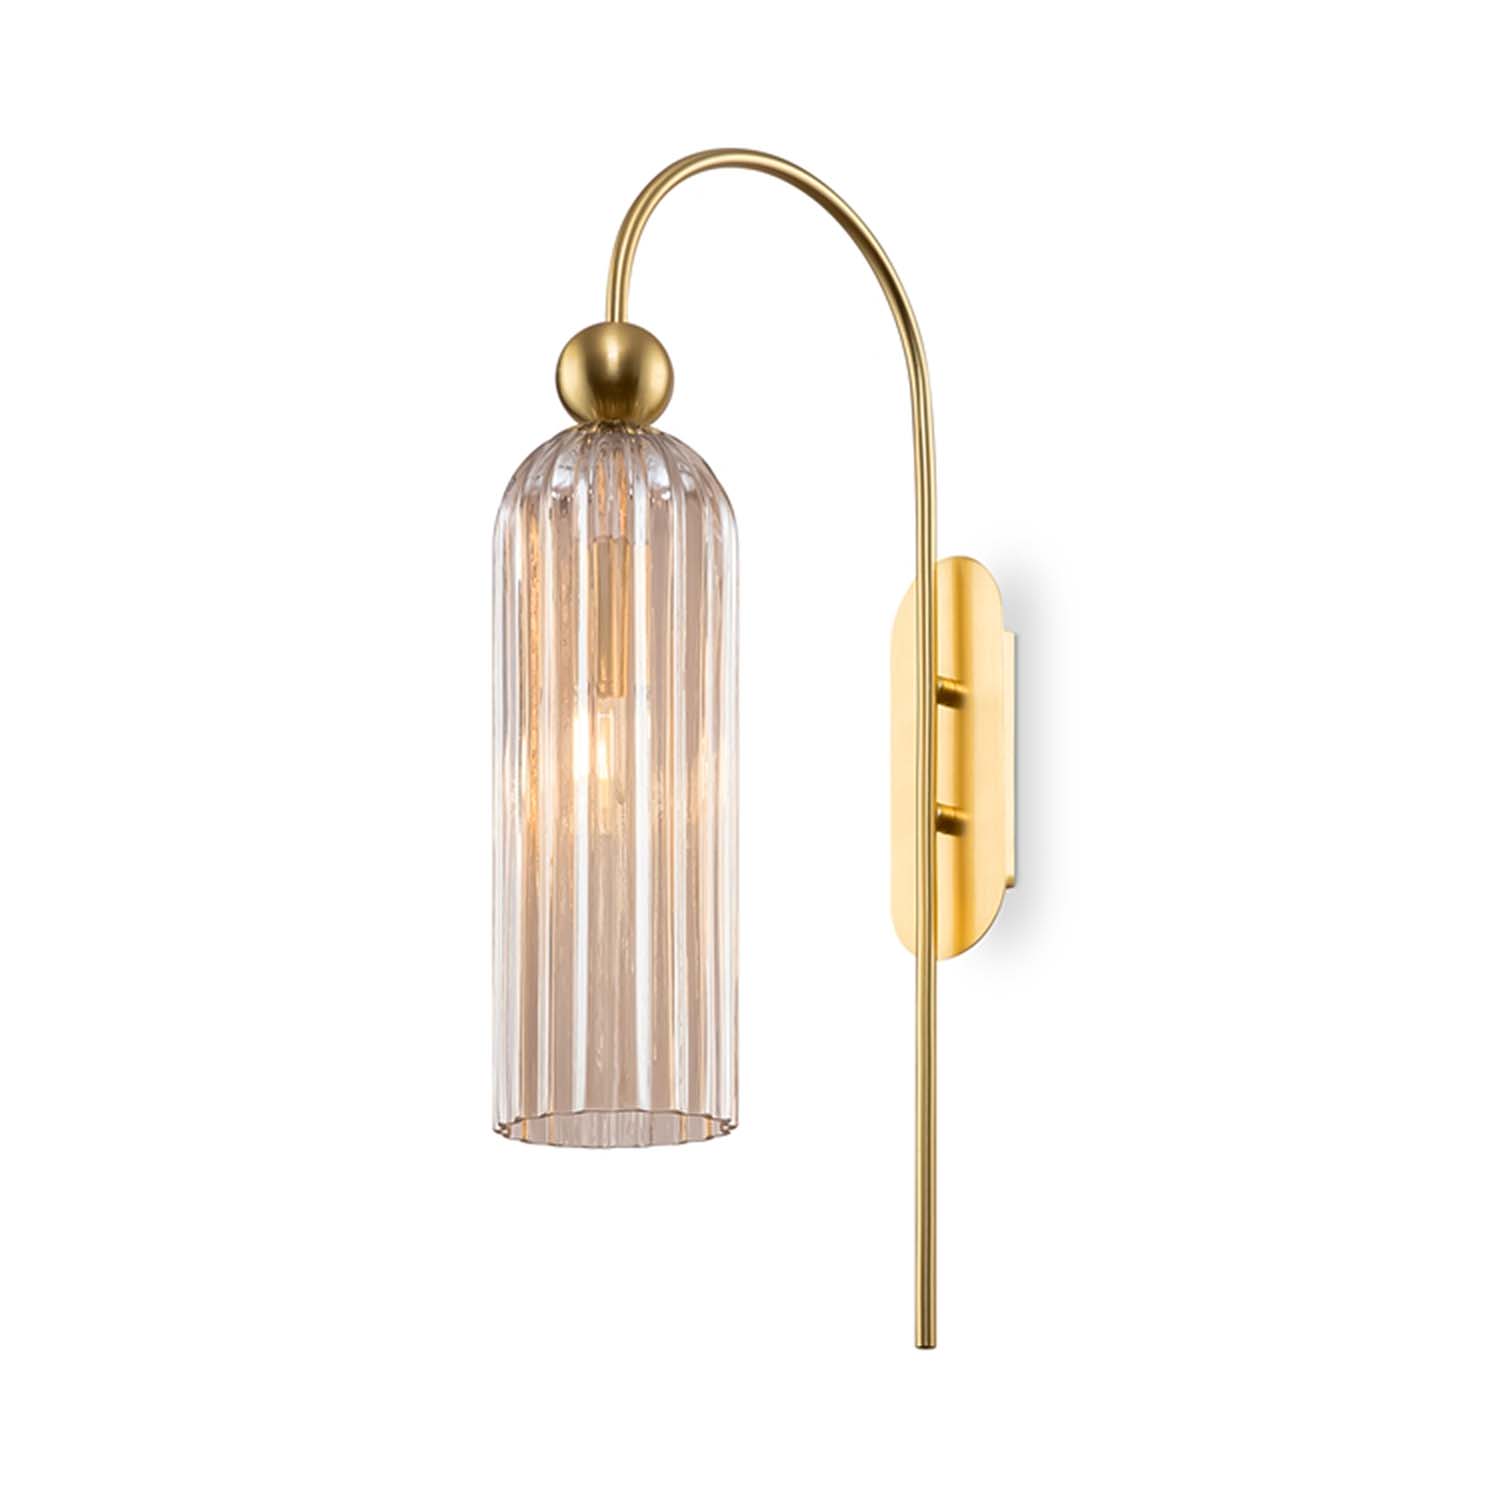 ANTIC - Chic glass and brass wall light